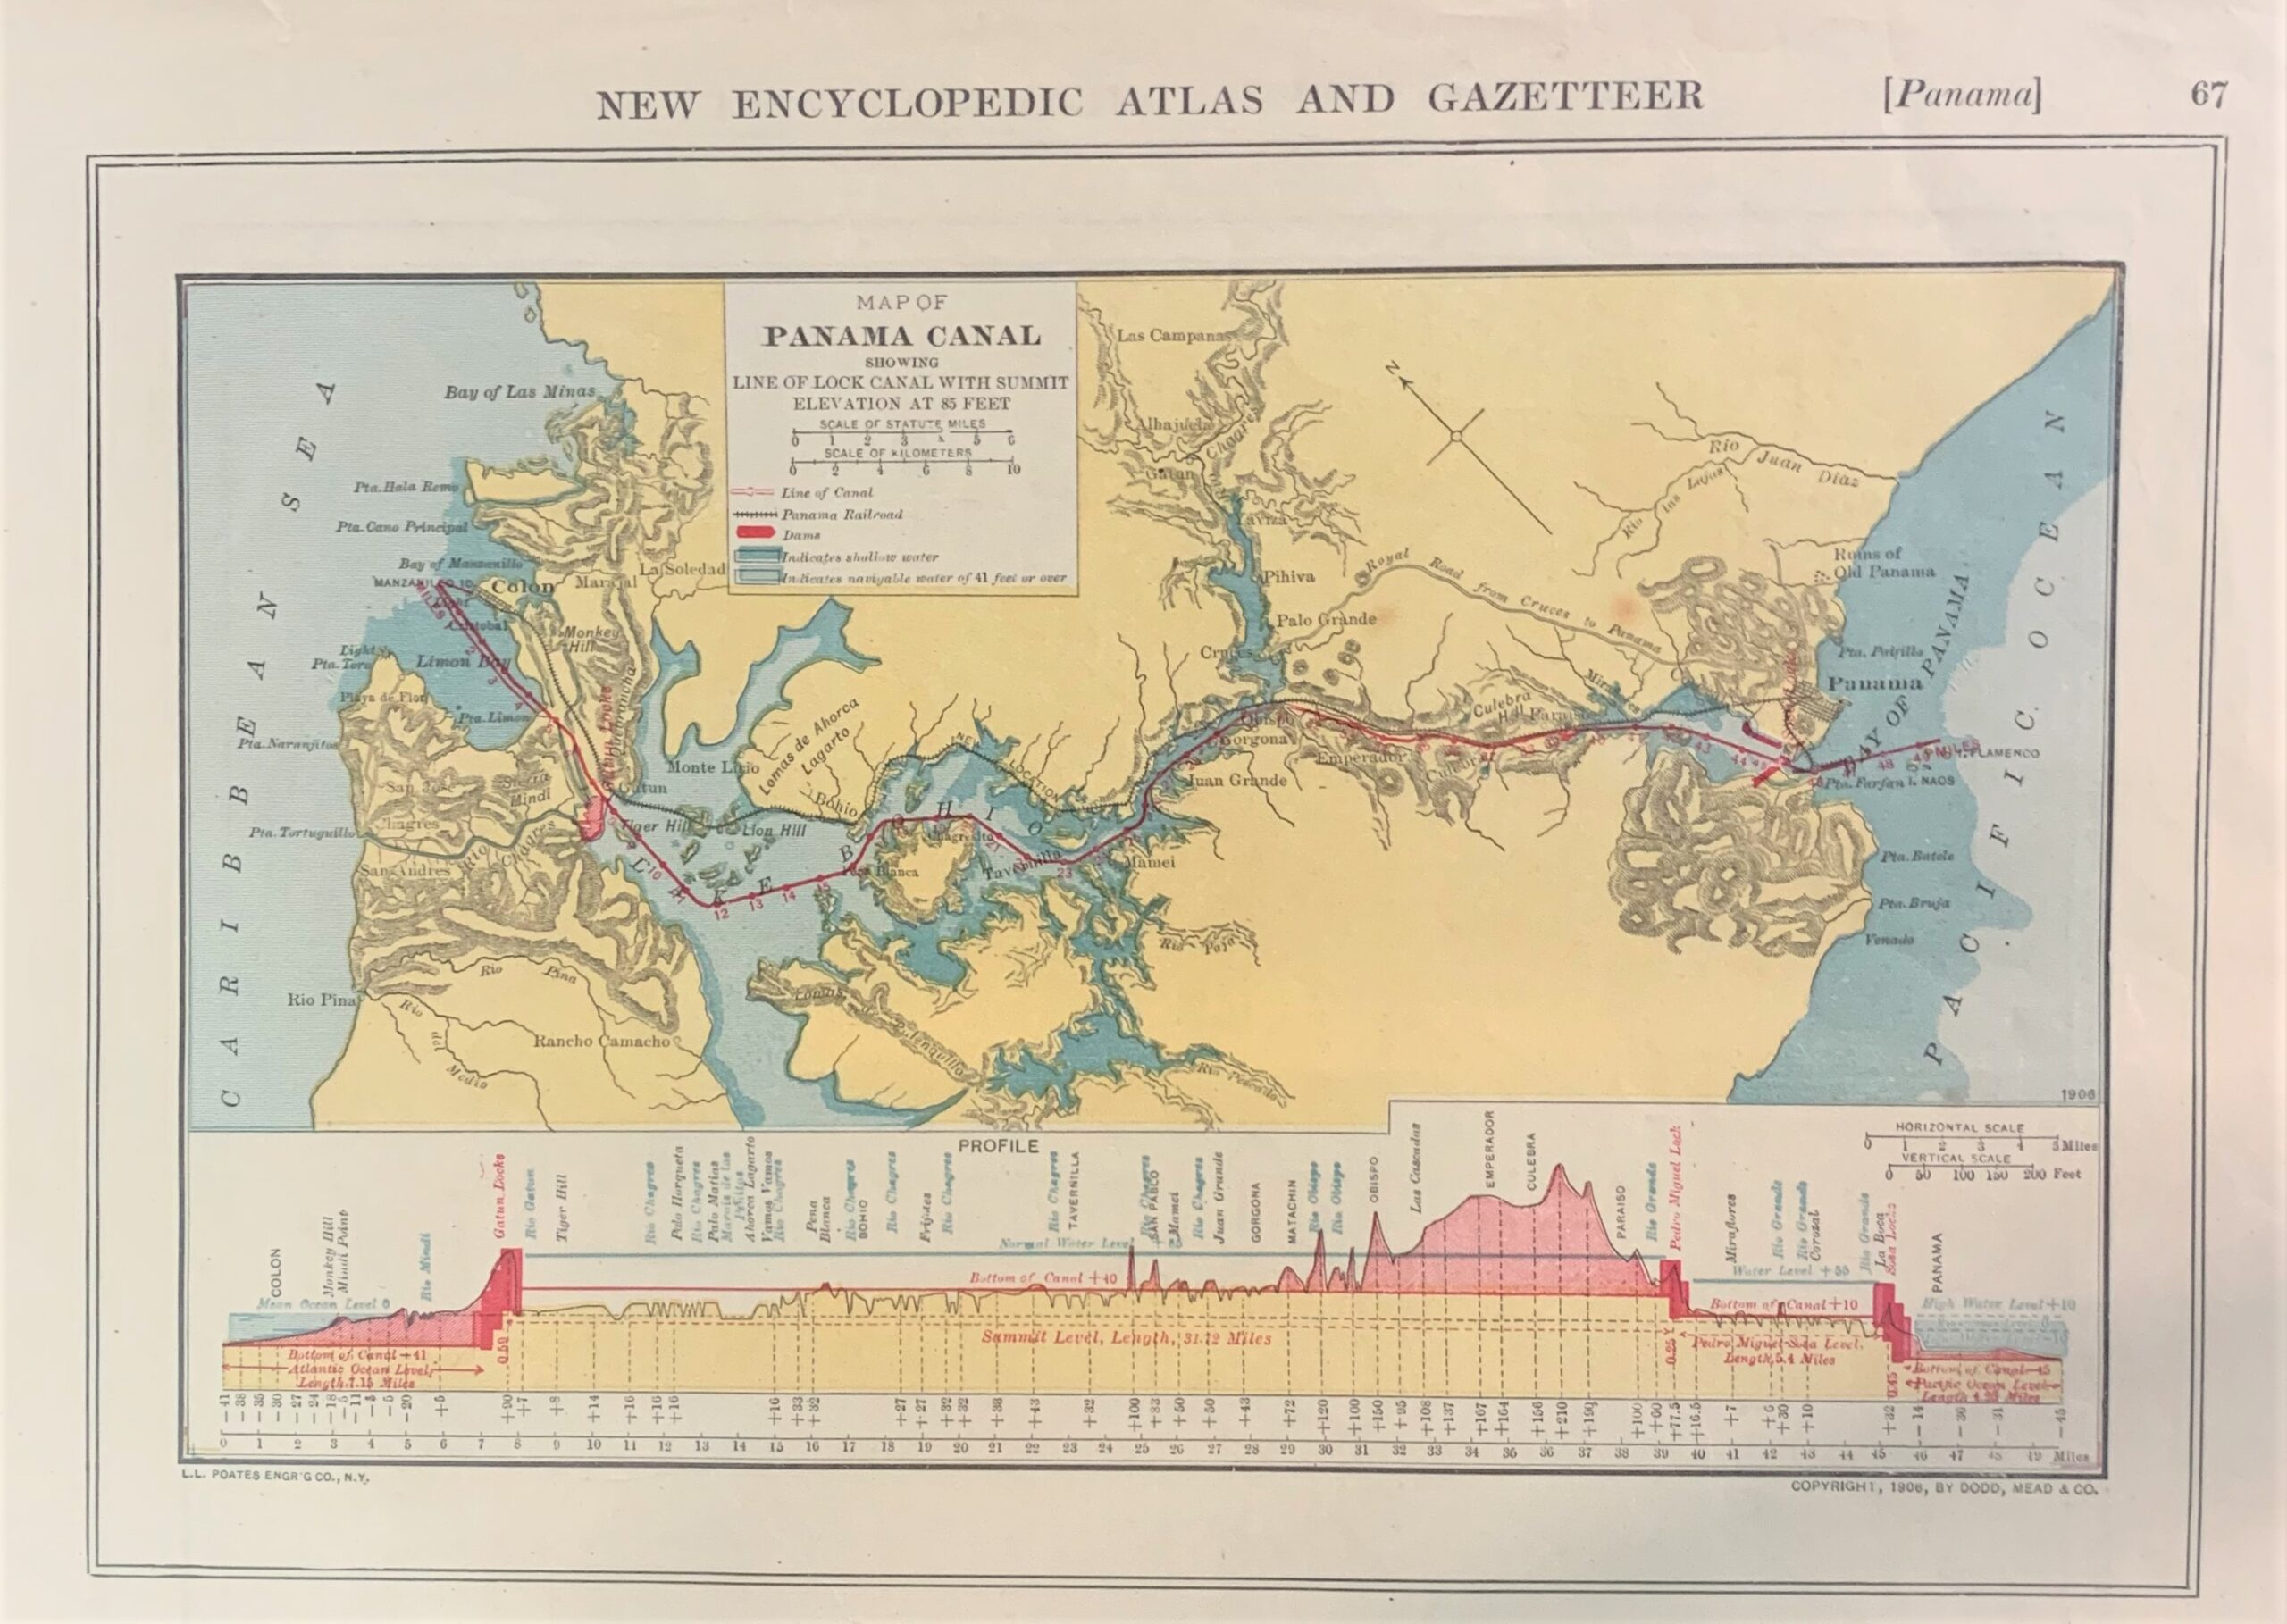 "Panama Canal showing line of lock canal with summit elevation at 85 feet"